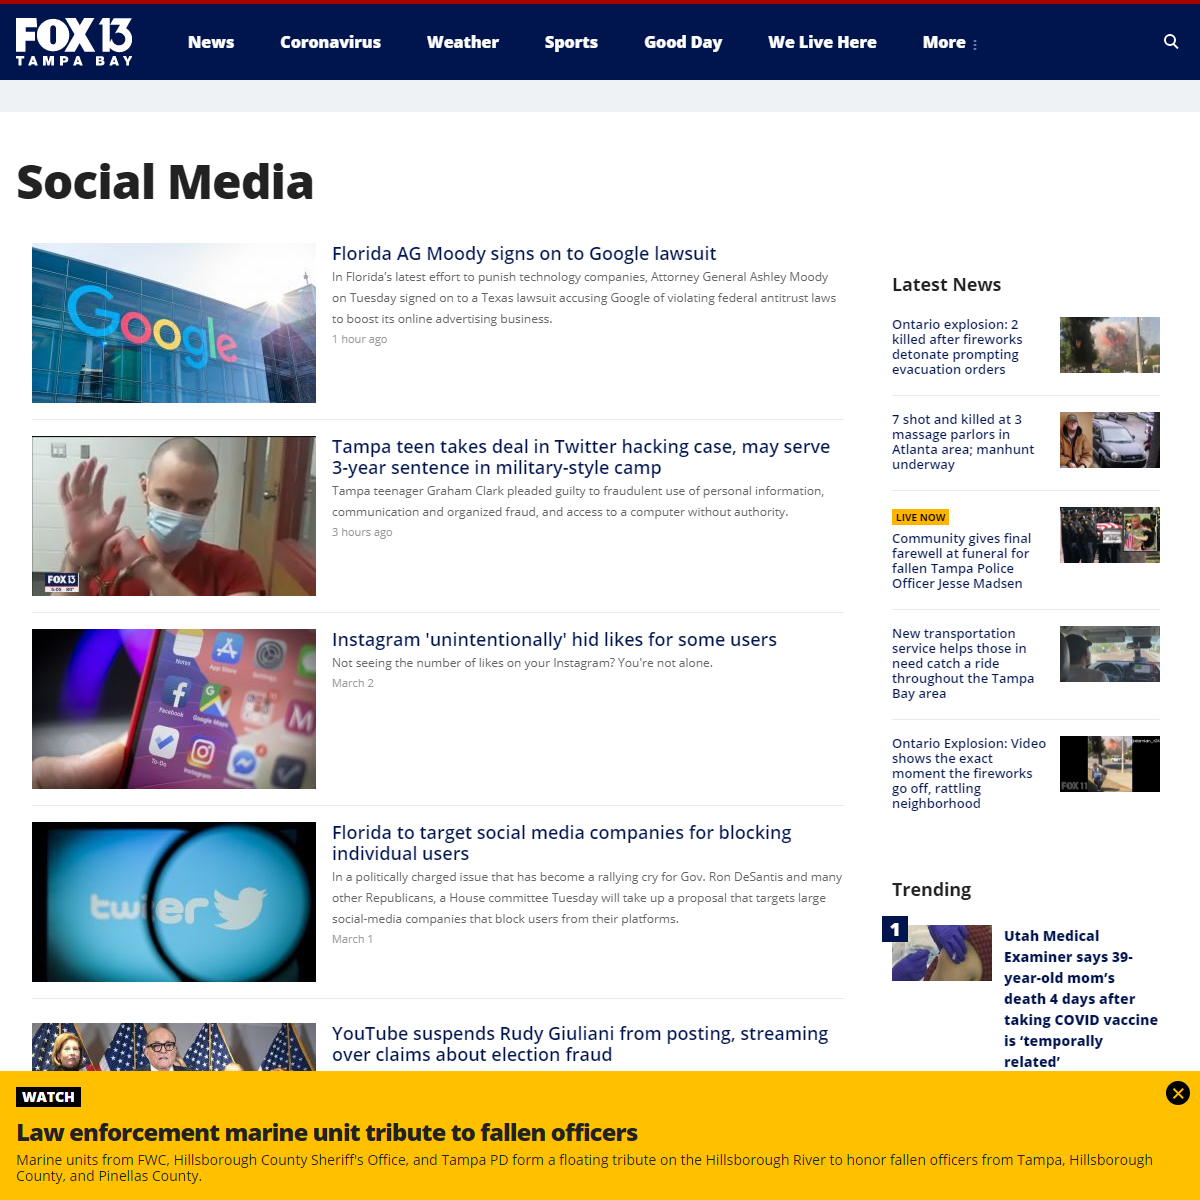 A complete backup of https://www.fox13news.com/tag/technology/social-media